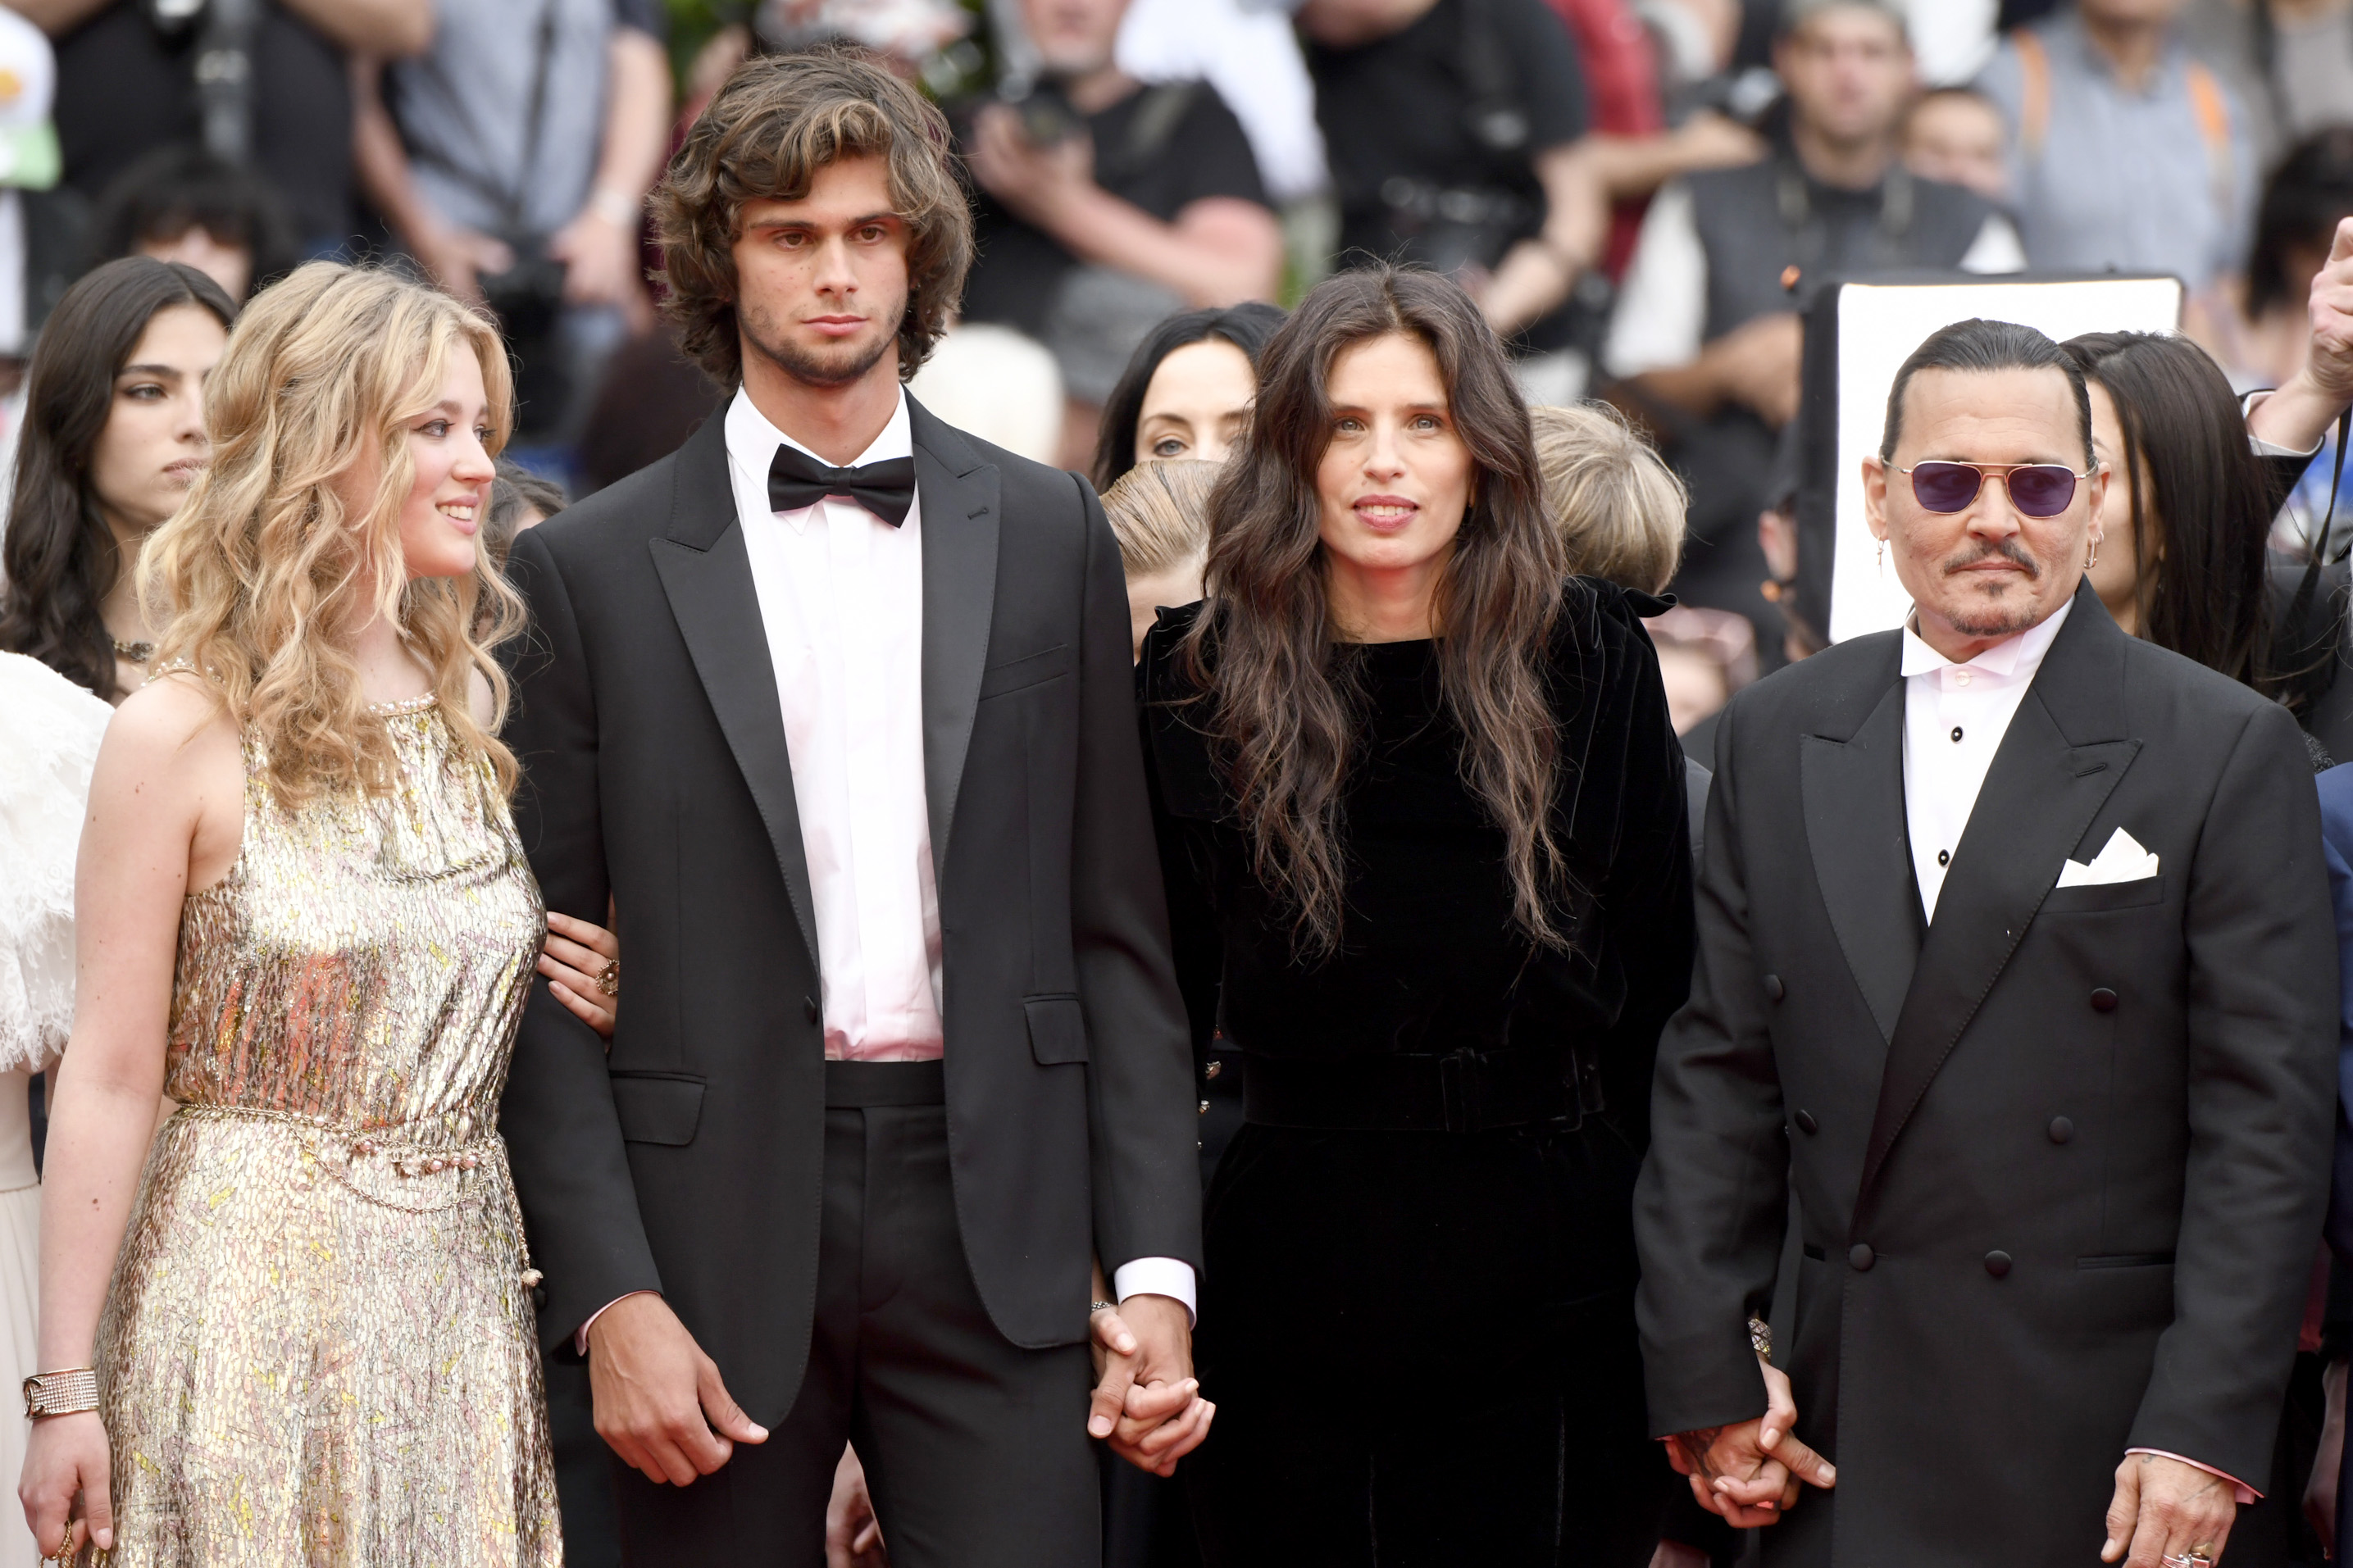 Pauline Pollman, Diego Le Fur, Maiwenn and Johnny Depp attend the "Jeanne du Barry" Screening & opening ceremony red carpet at the 76th annual Cannes film festival at Palais des Festivals, on May 16, 2023, in Cannes, France. | Source: Getty Images